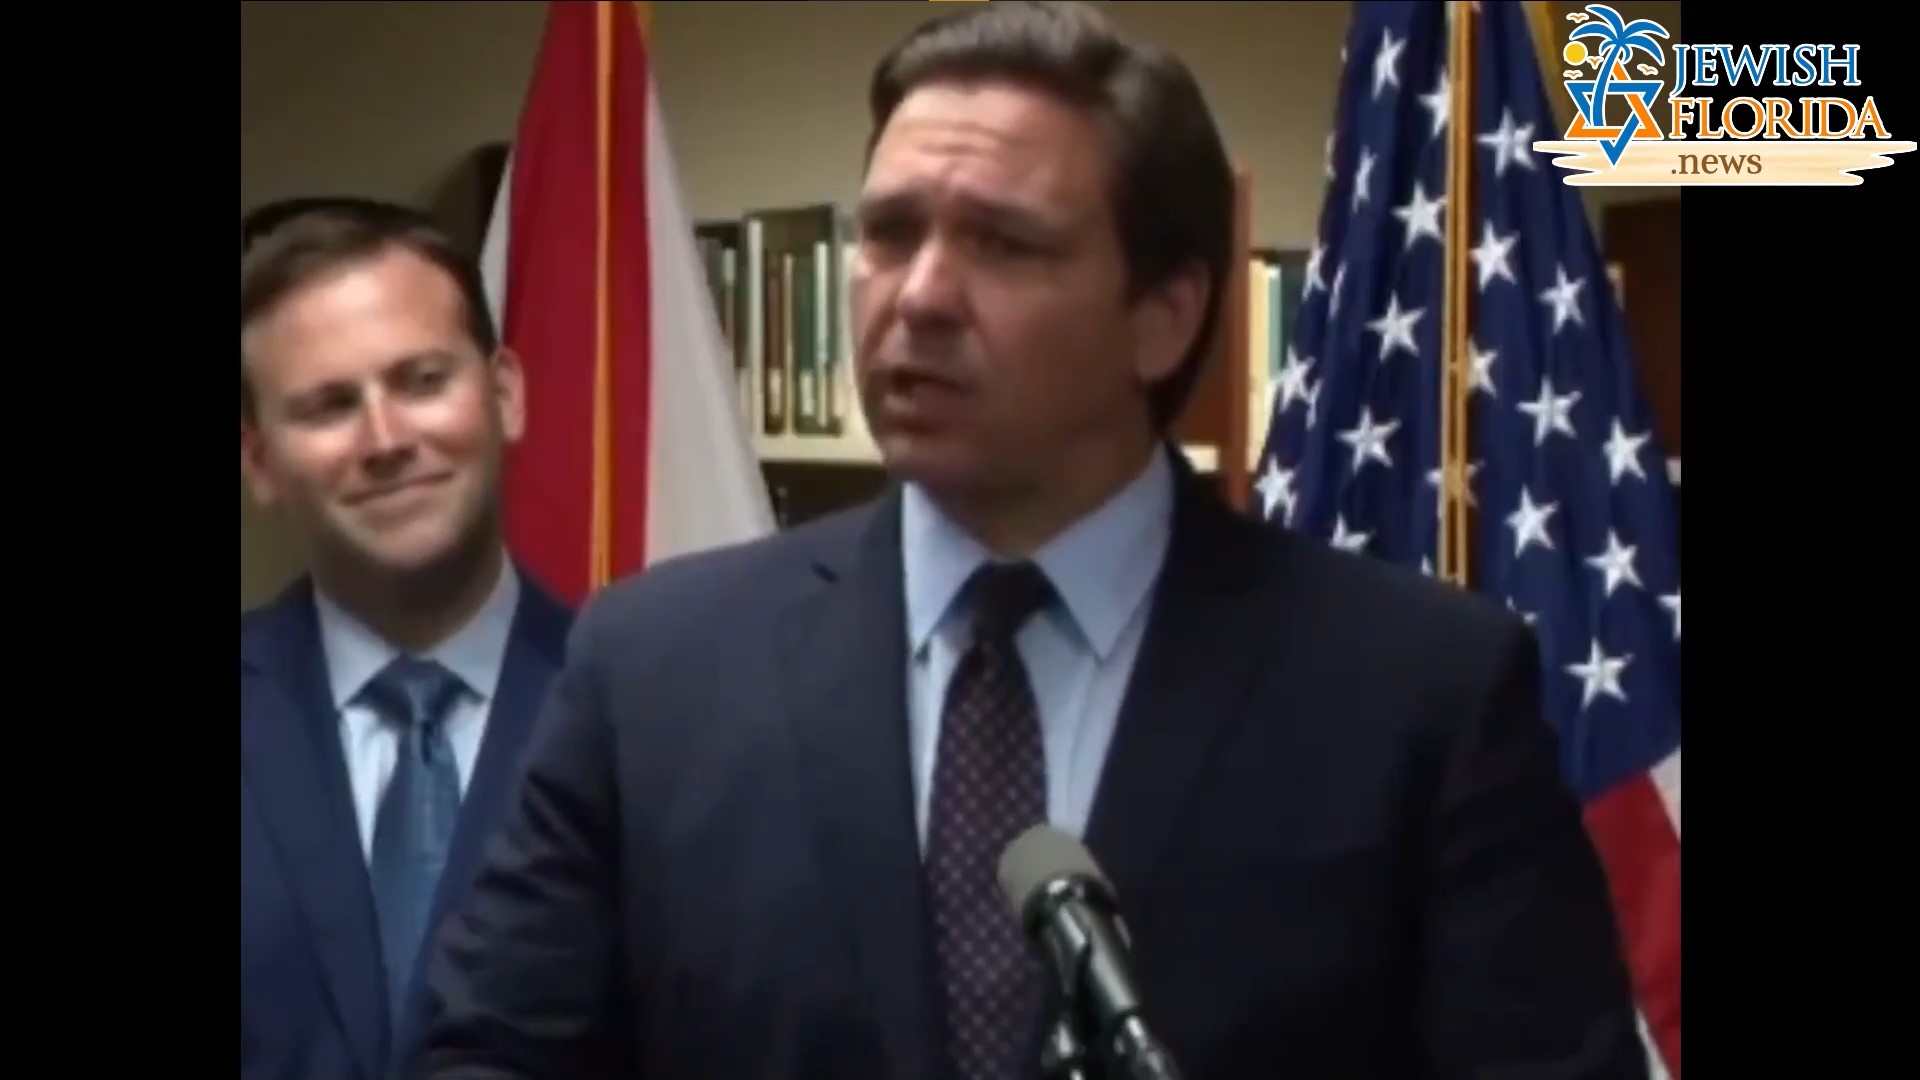 Gov DeSantis promises there will not be any lockdowns